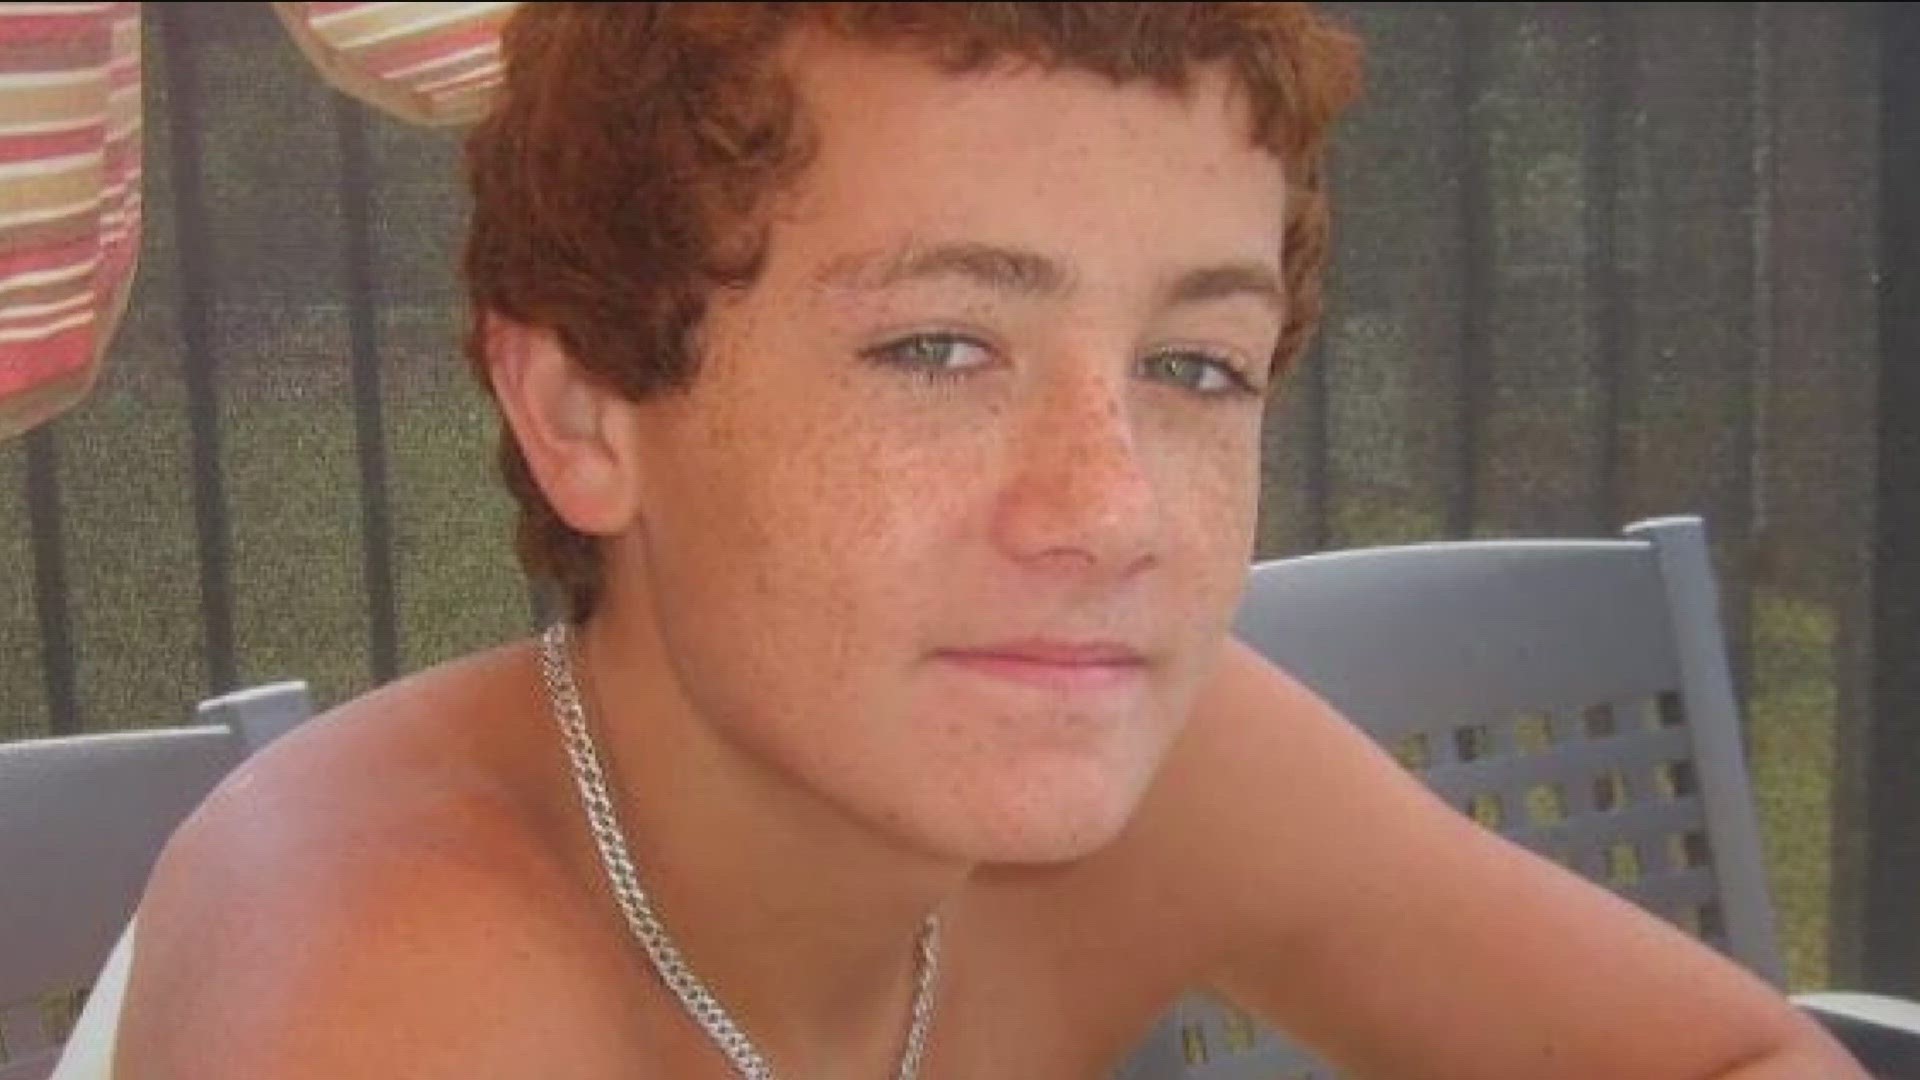 More than a dozen years later, there has been no arrests in the Coweta County teen's case.